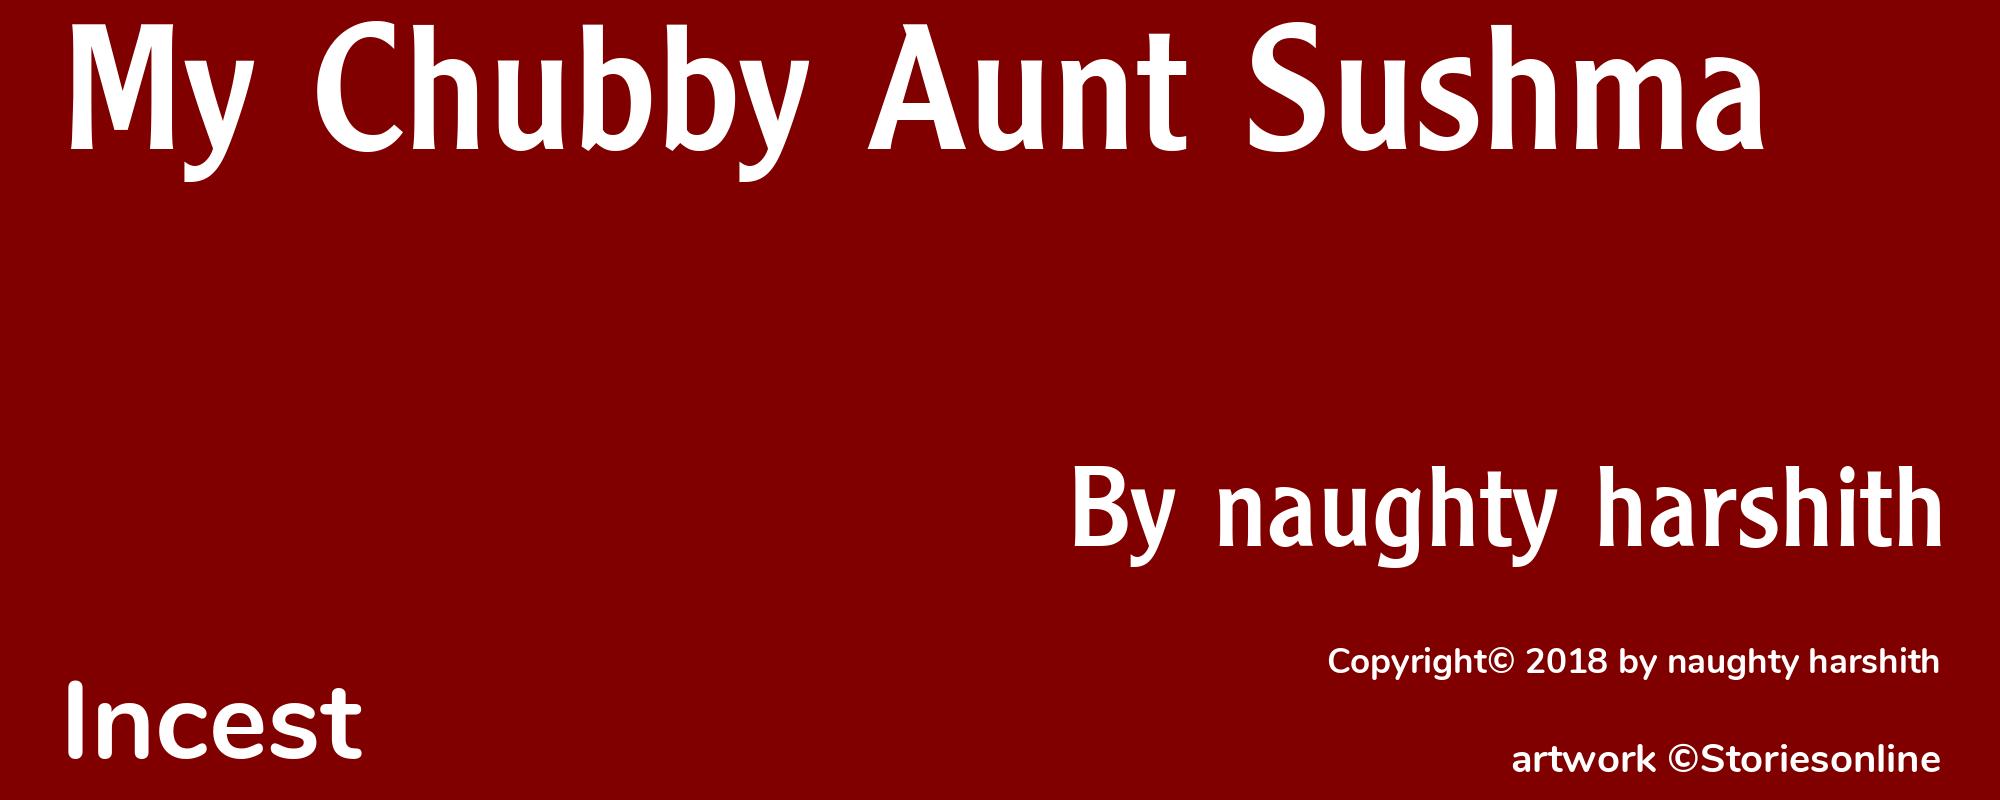 My Chubby Aunt Sushma - Cover